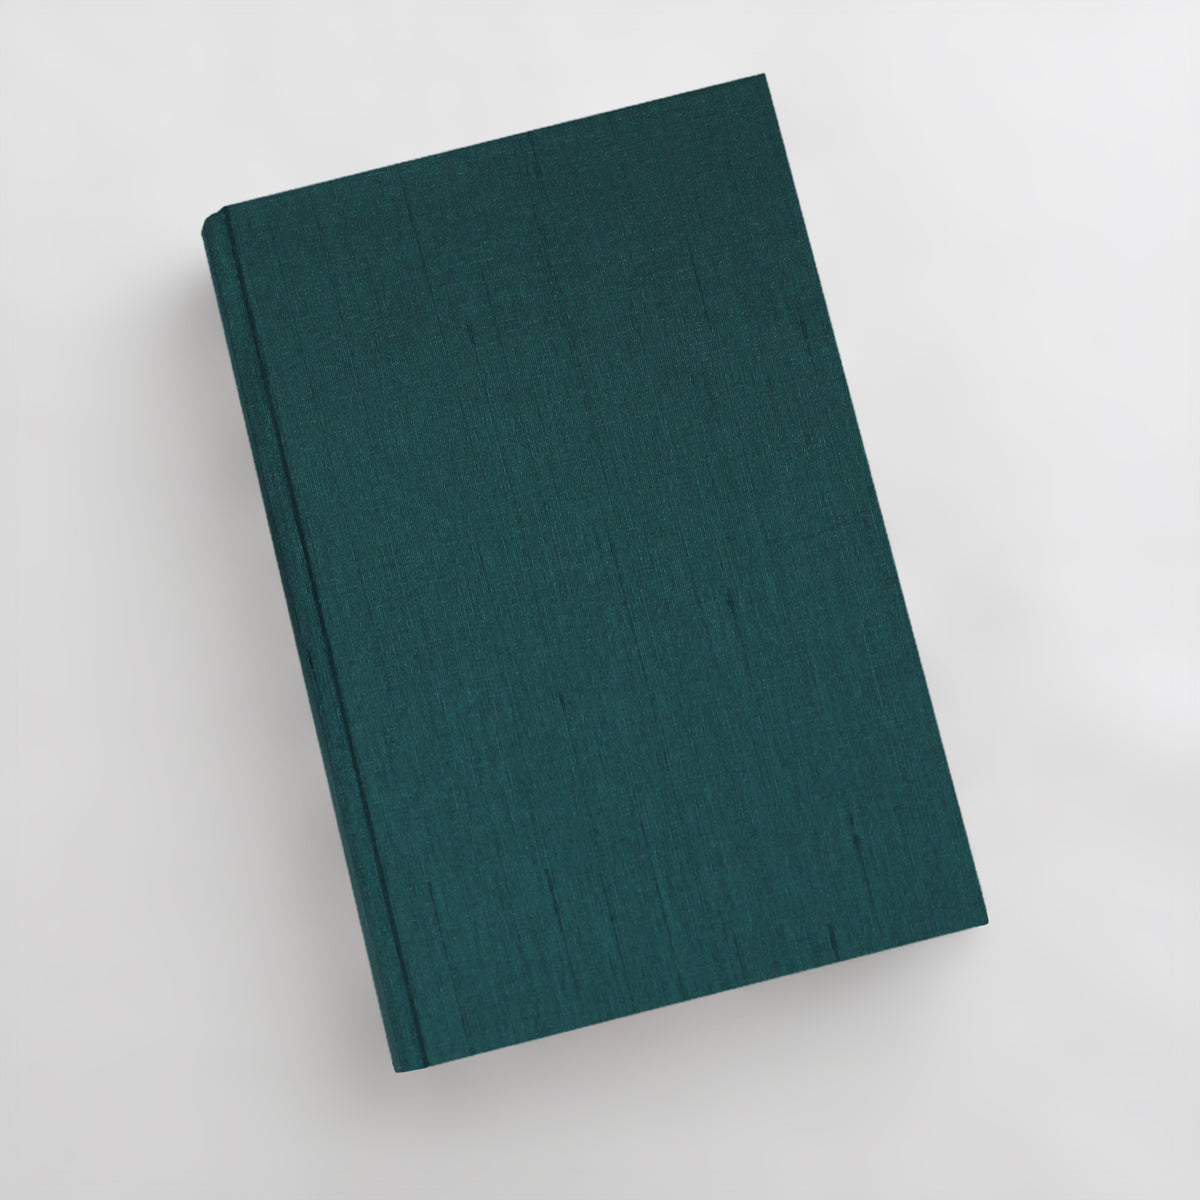 Medium 5.5x8.5 Blank Page Journal | Cover: Teal Blue Silk | Available Personalized